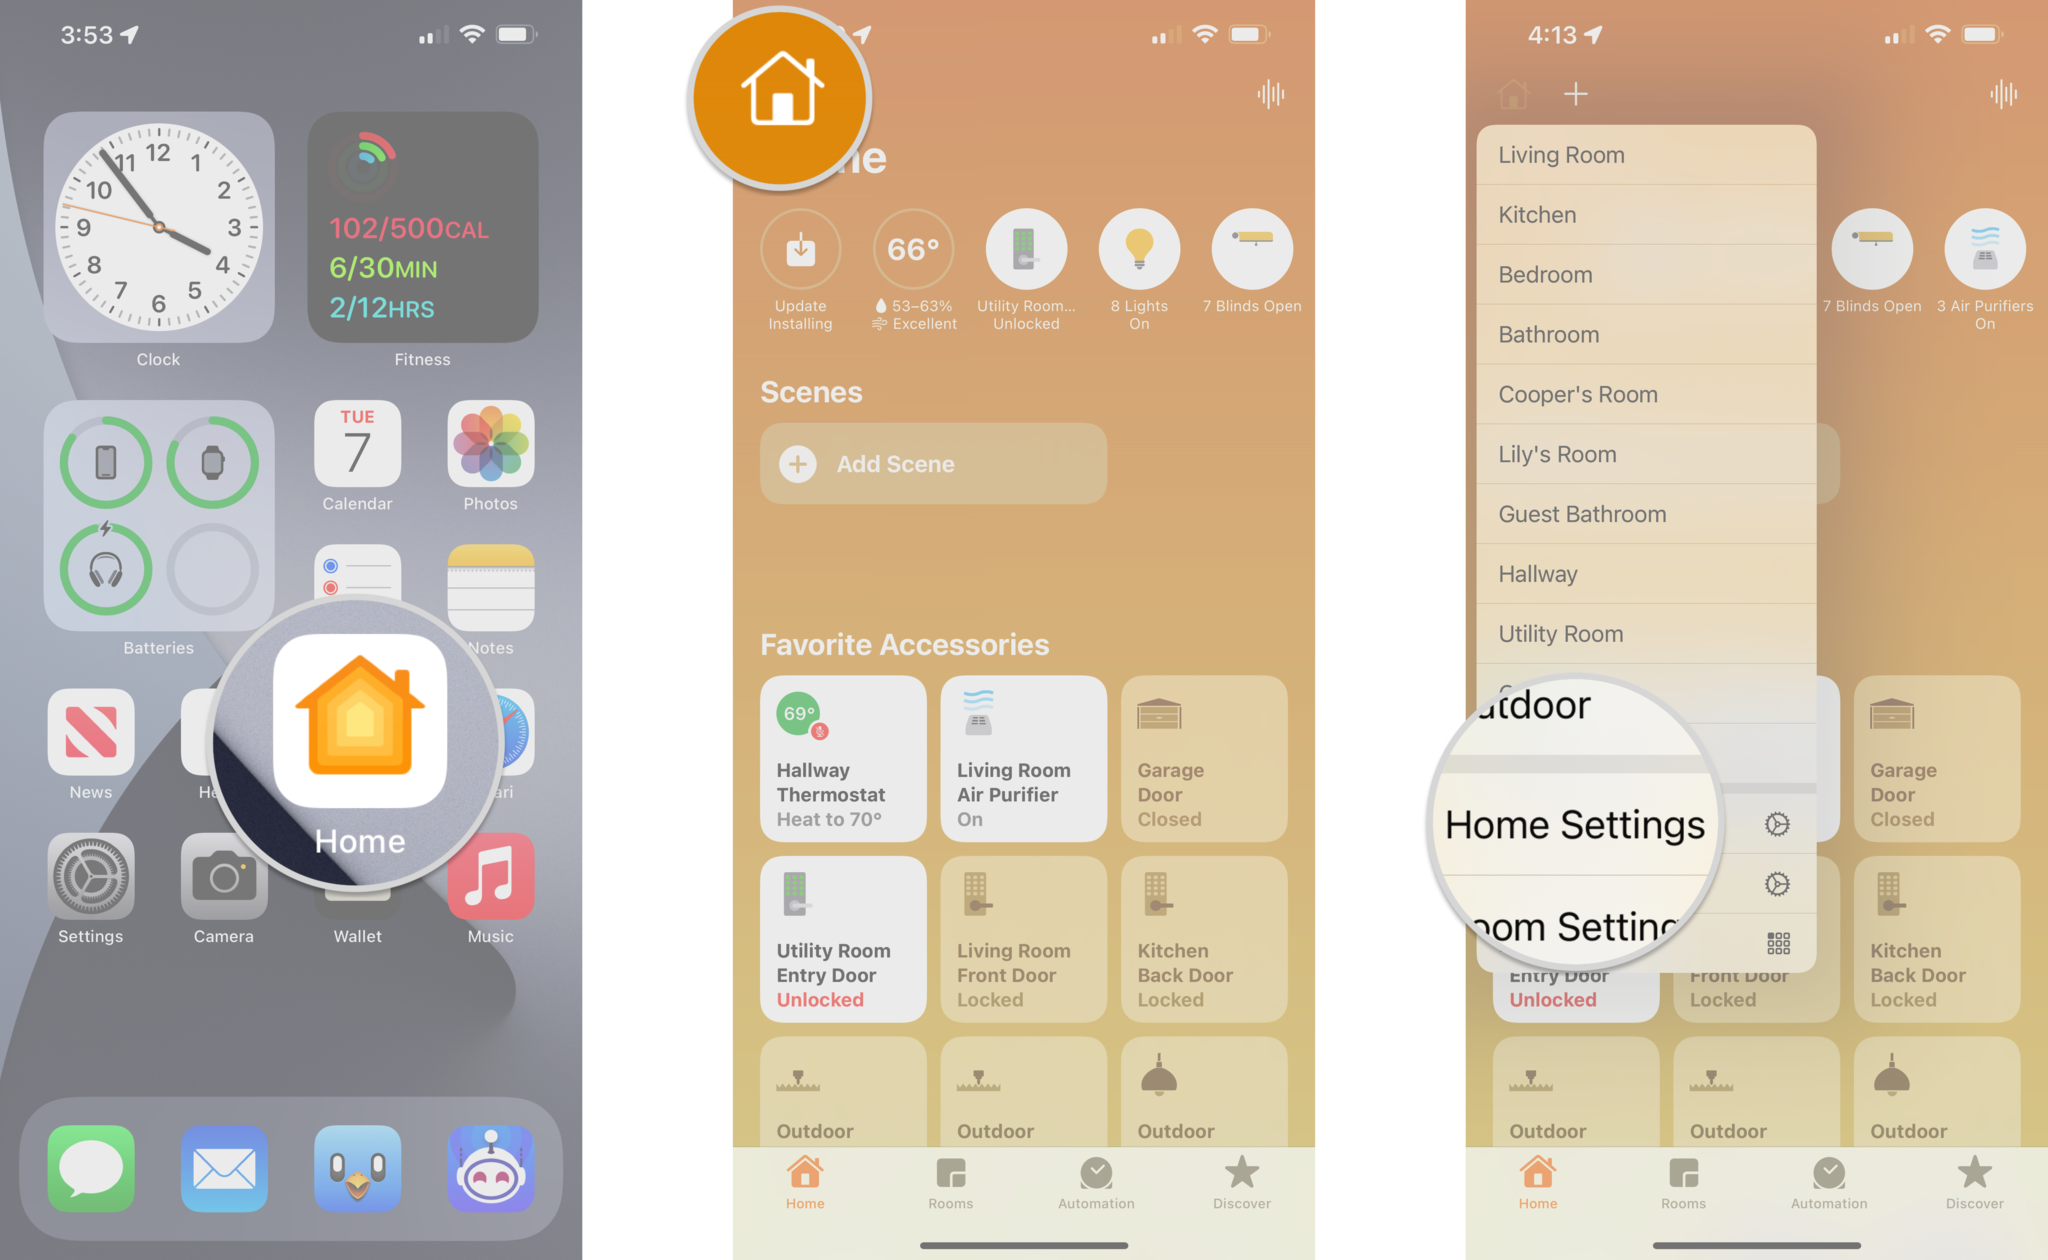 How to manage HomeKit remote access permissions in the Home app on the iPhone by showing steps: Launch the Home app, Tap the Home Button, Tap Home Settings